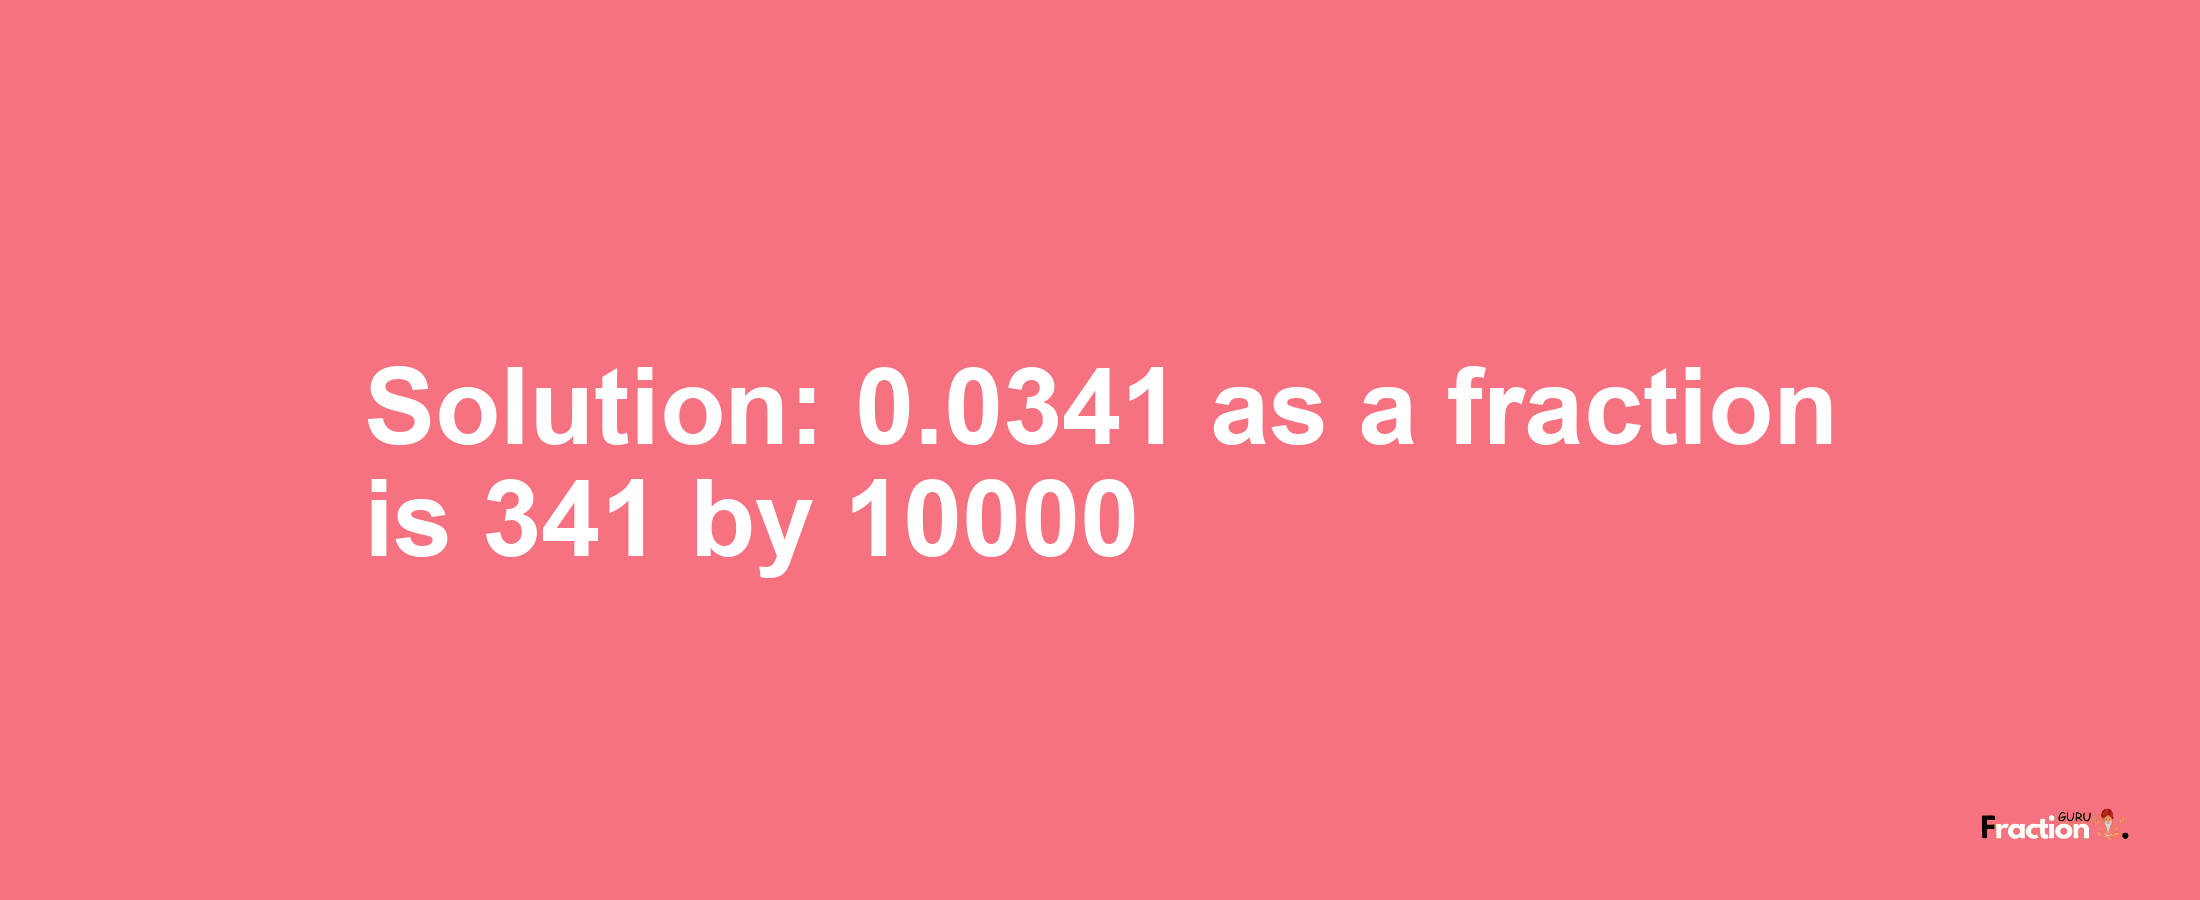 Solution:0.0341 as a fraction is 341/10000